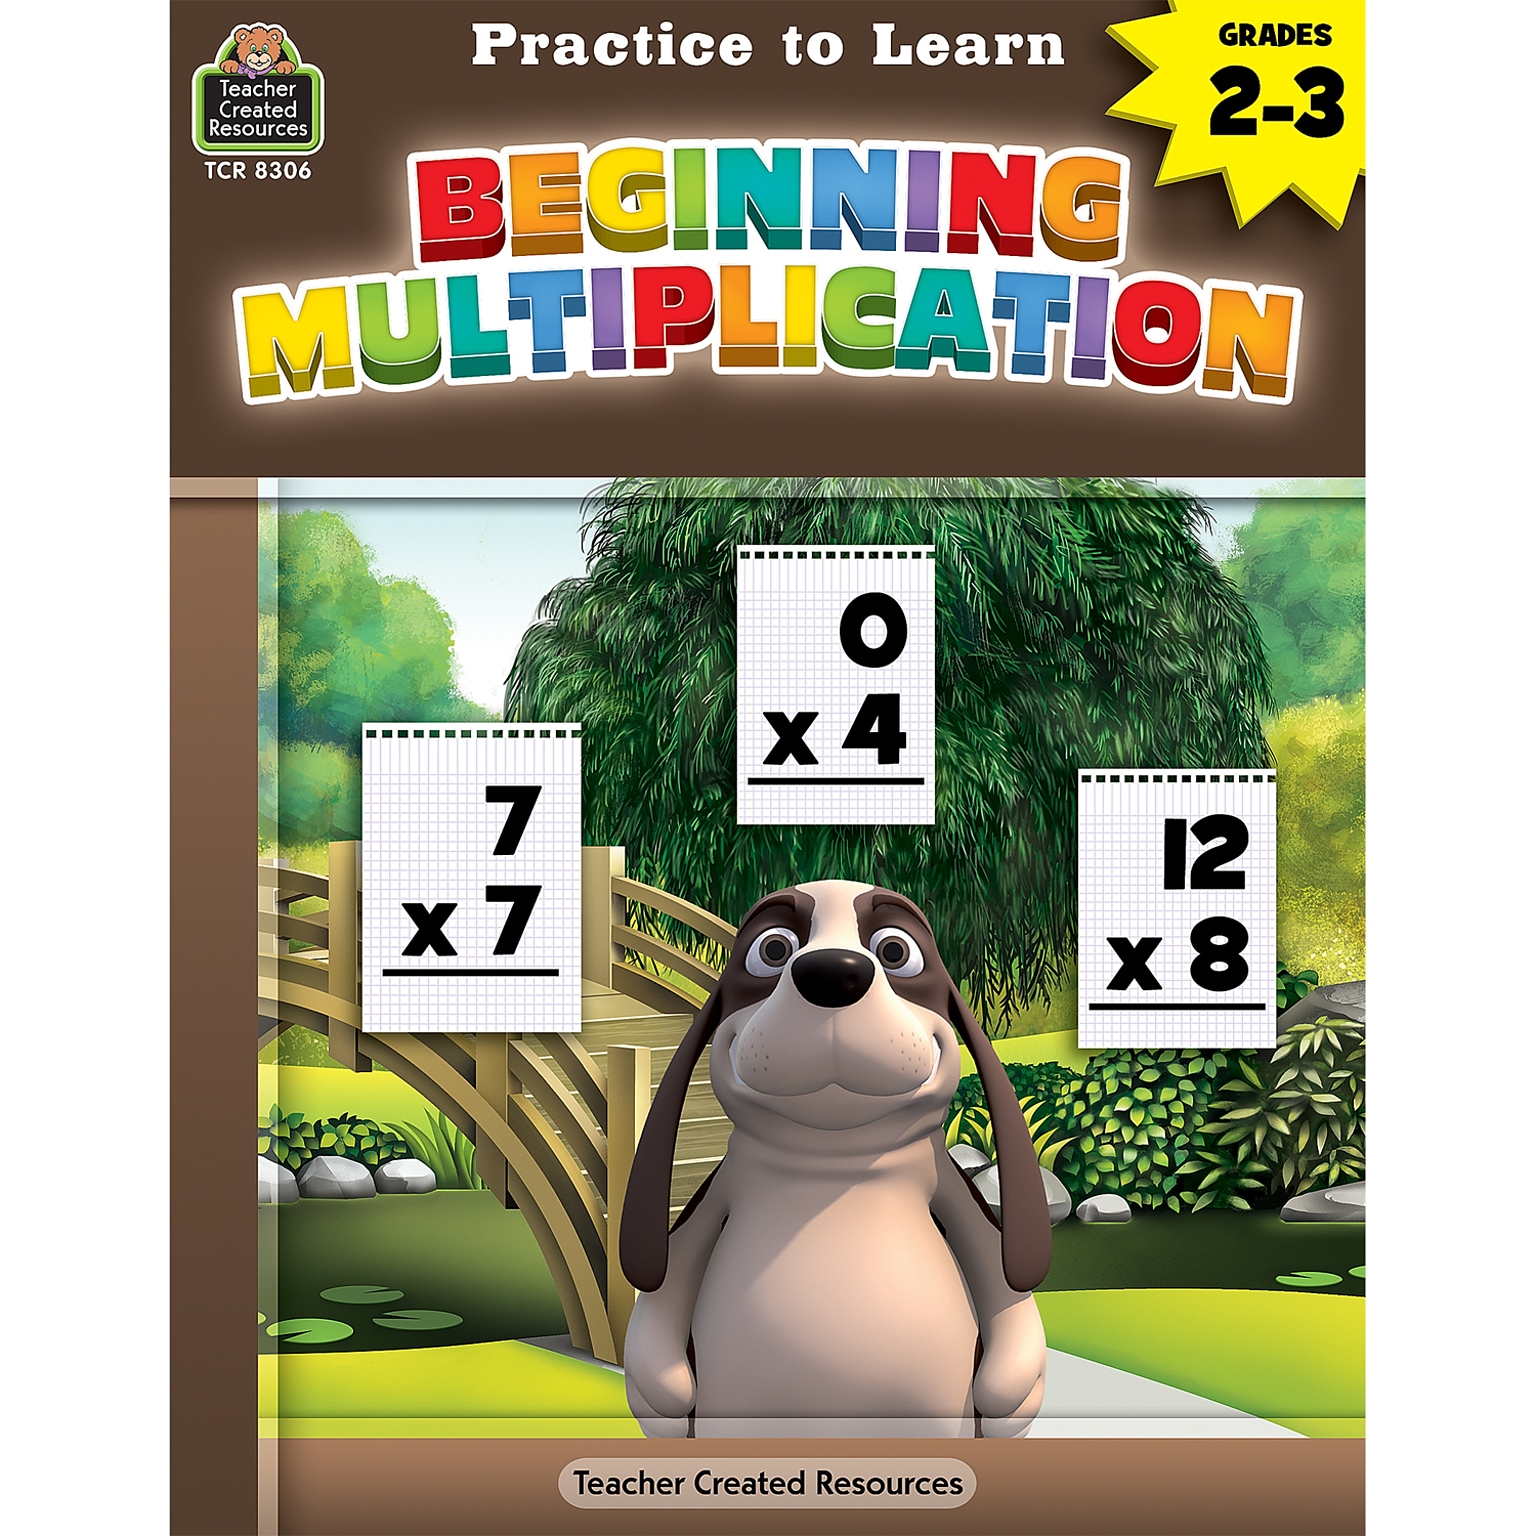 Teacher Created Resources Practice to Learn: Beginning Multiplication